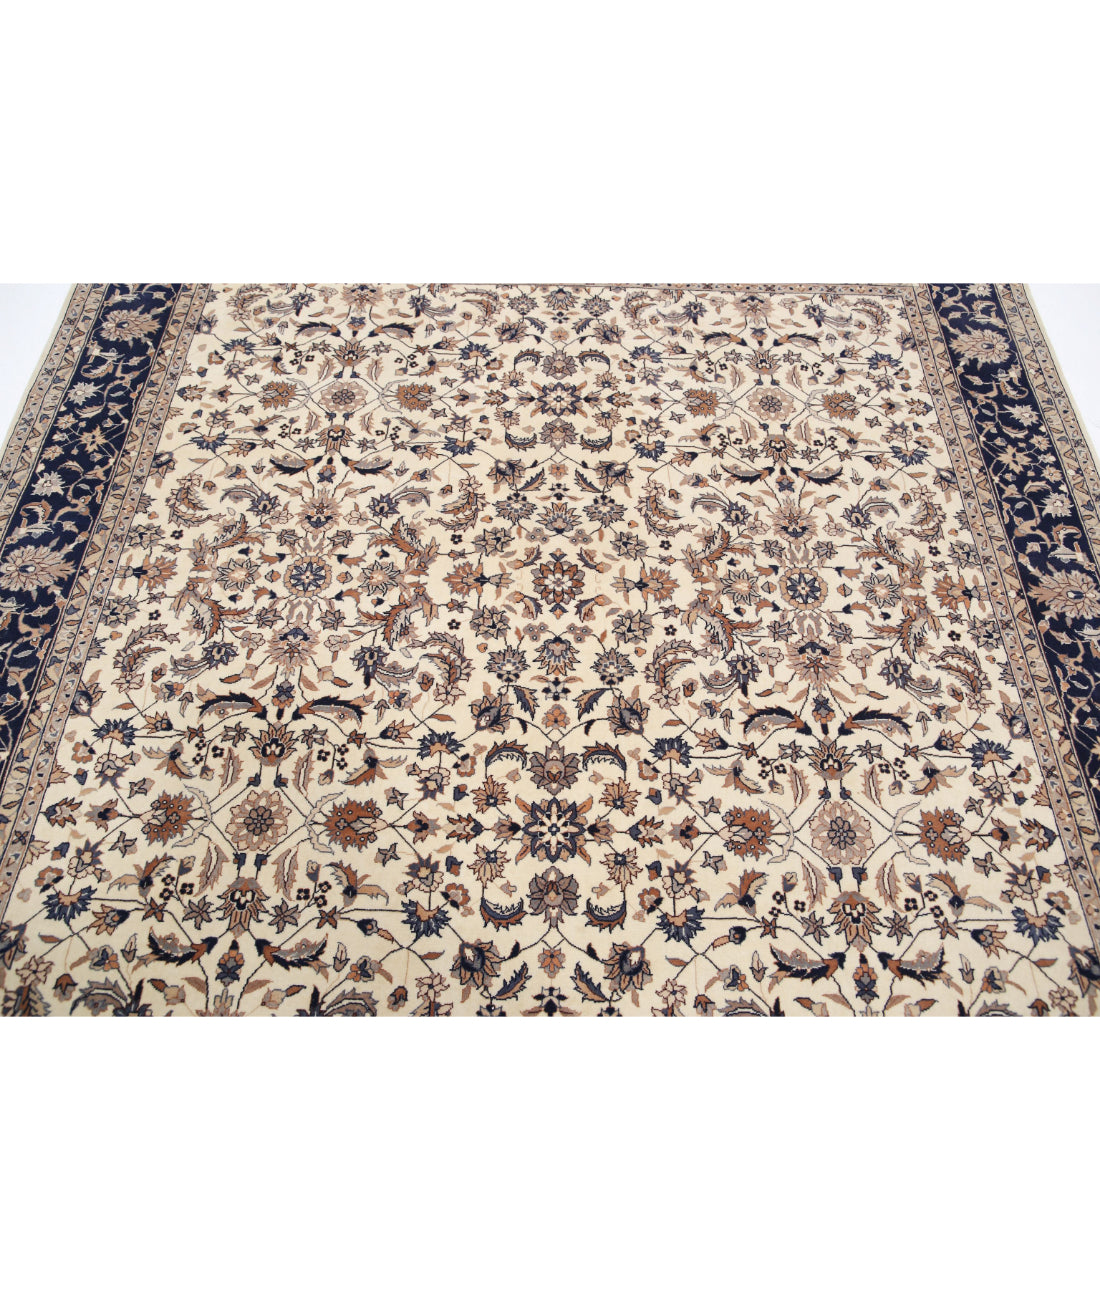 Heritage 6'8'' X 6'8'' Hand-Knotted Wool Rug 6'8'' x 6'8'' (200 X 200) / Ivory / Blue